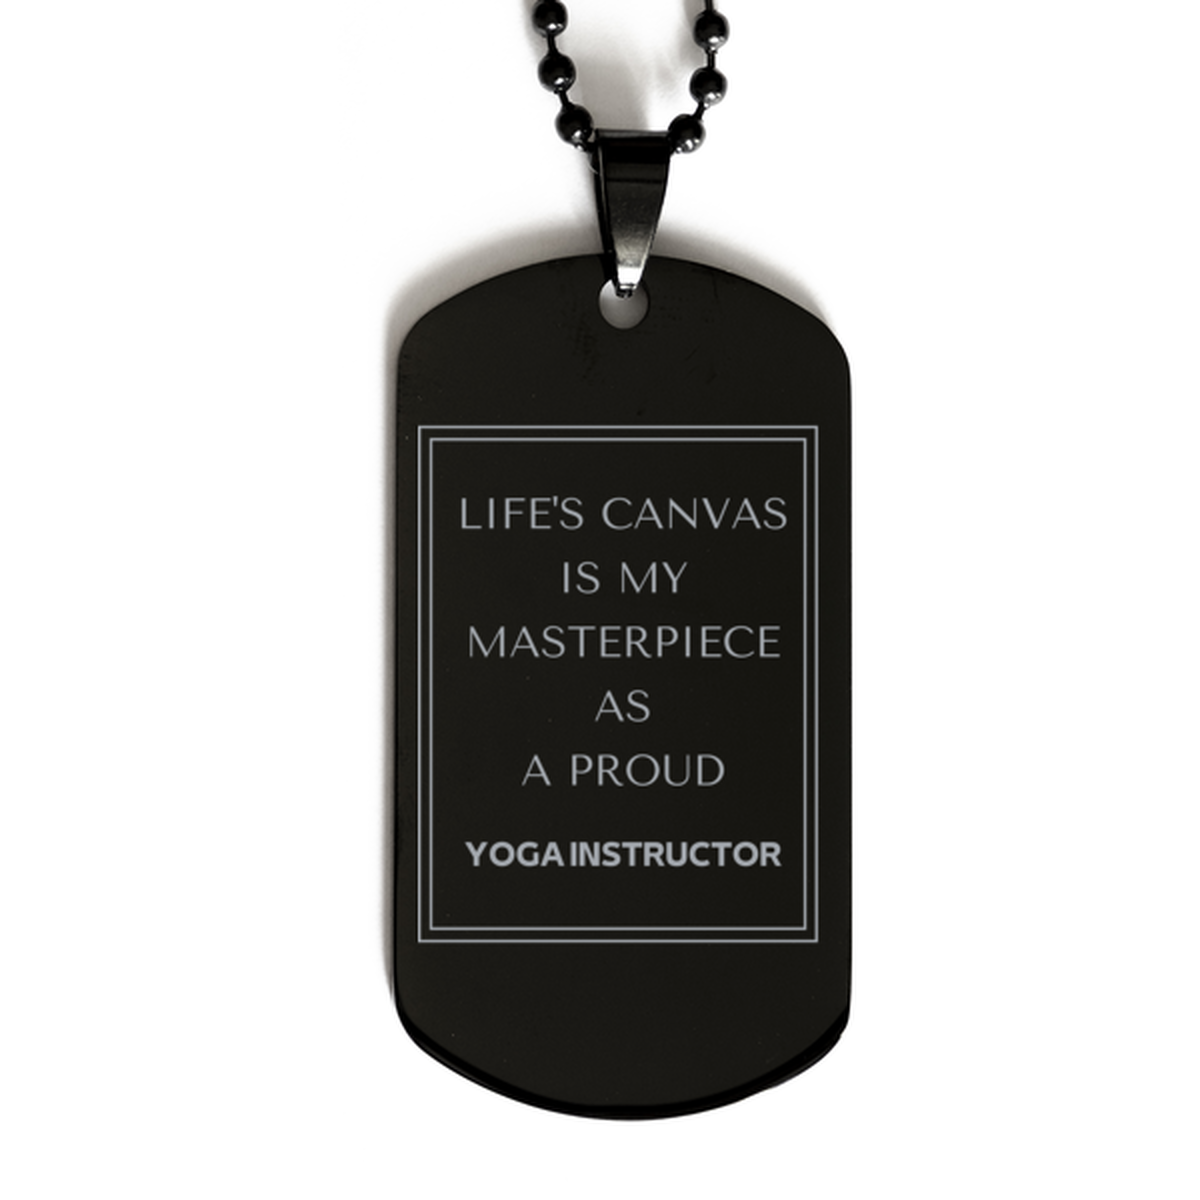 Proud Yoga Instructor Gifts, Life's canvas is my masterpiece, Epic Birthday Christmas Unique Black Dog Tag For Yoga Instructor, Coworkers, Men, Women, Friends